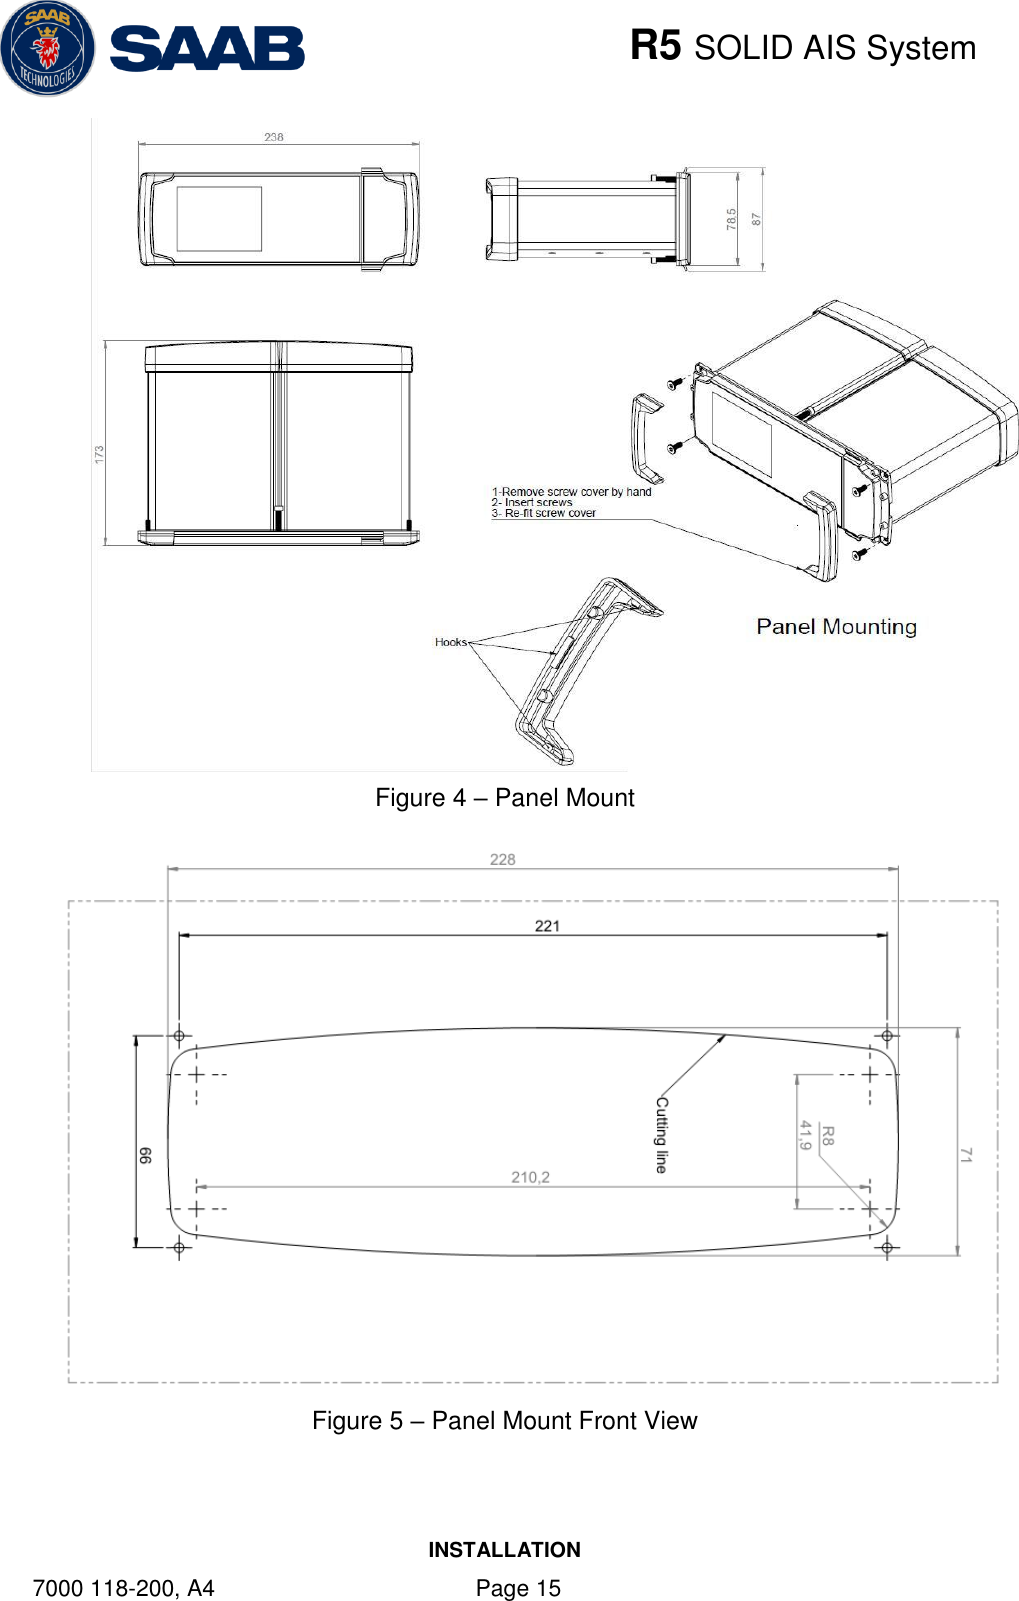    R5 SOLID AIS System INSTALLATION 7000 118-200, A4    Page 15  Figure 4 – Panel Mount  Figure 5 – Panel Mount Front View 